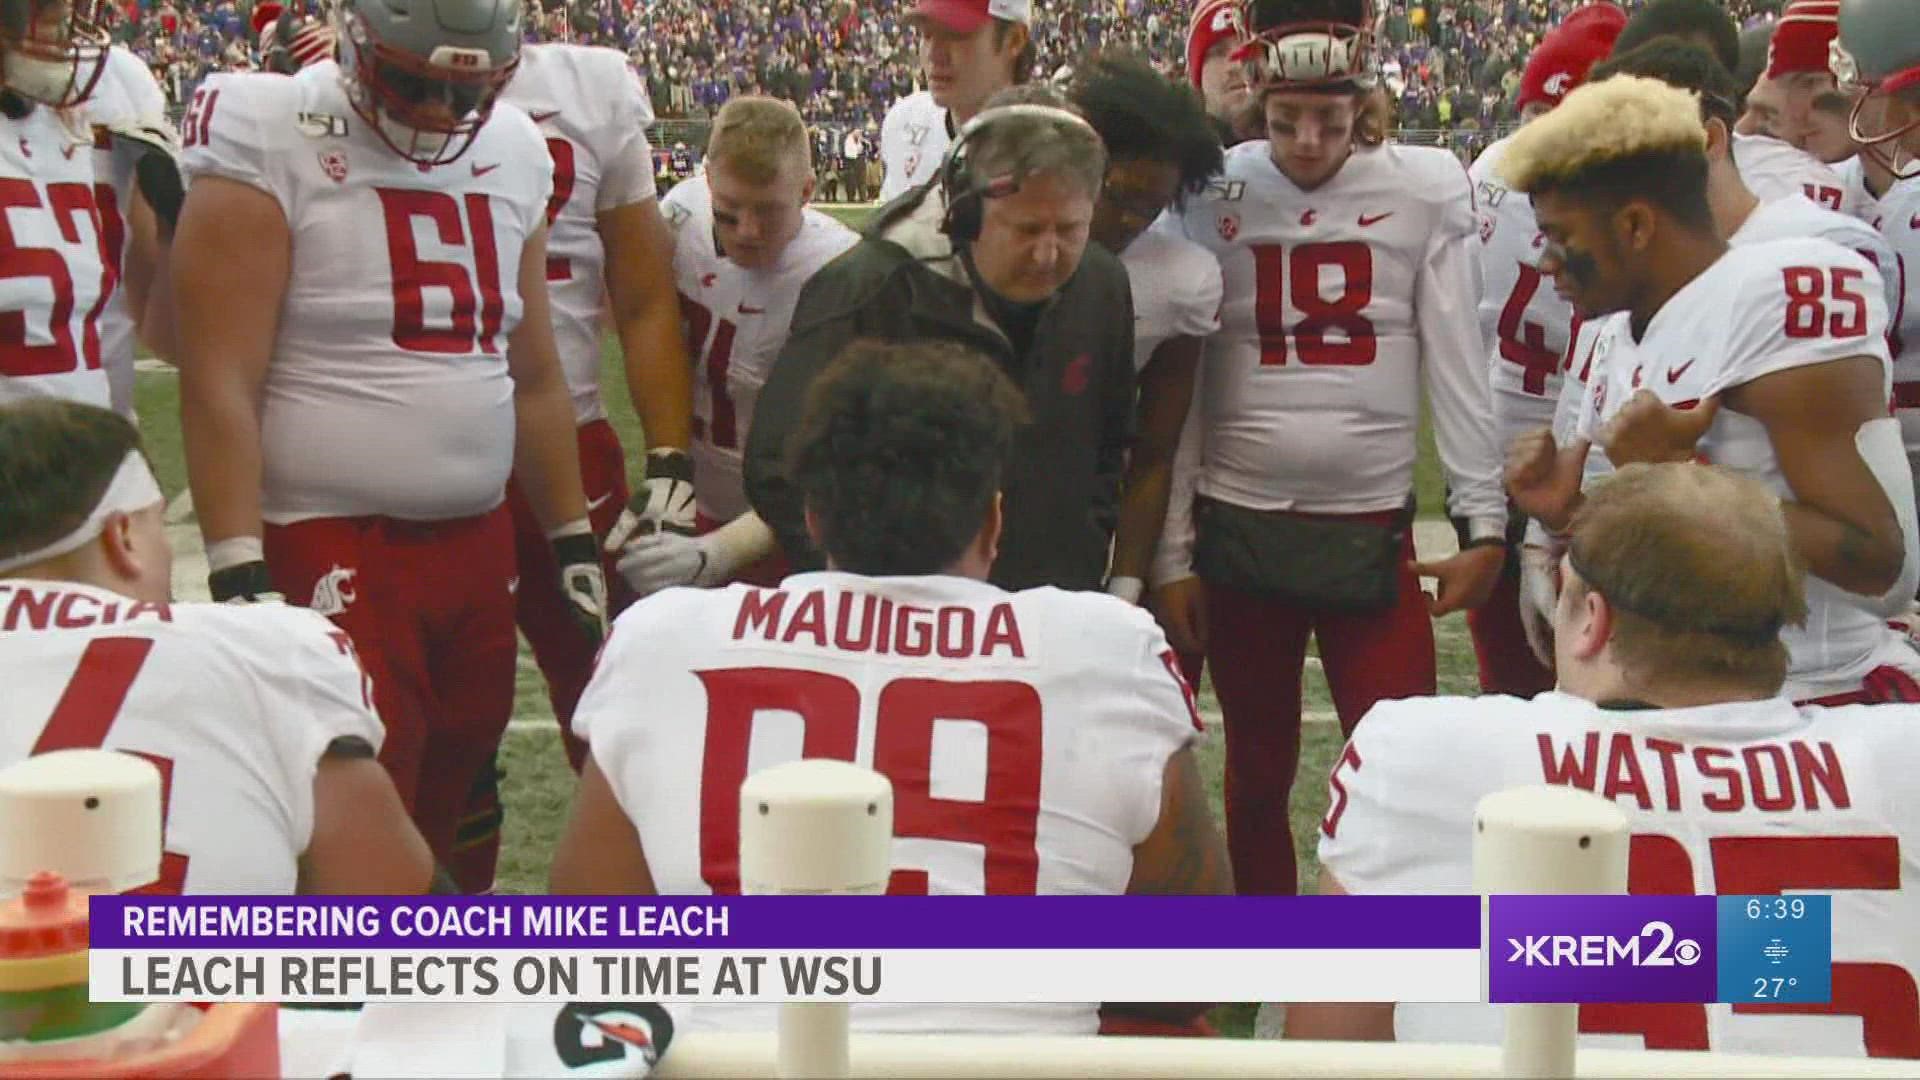 KREM 2 dug into the archives to uncover Mike Leach's heartfelt goodbye to WSU after accepting the head coaching job at Mississippi State in 2019.